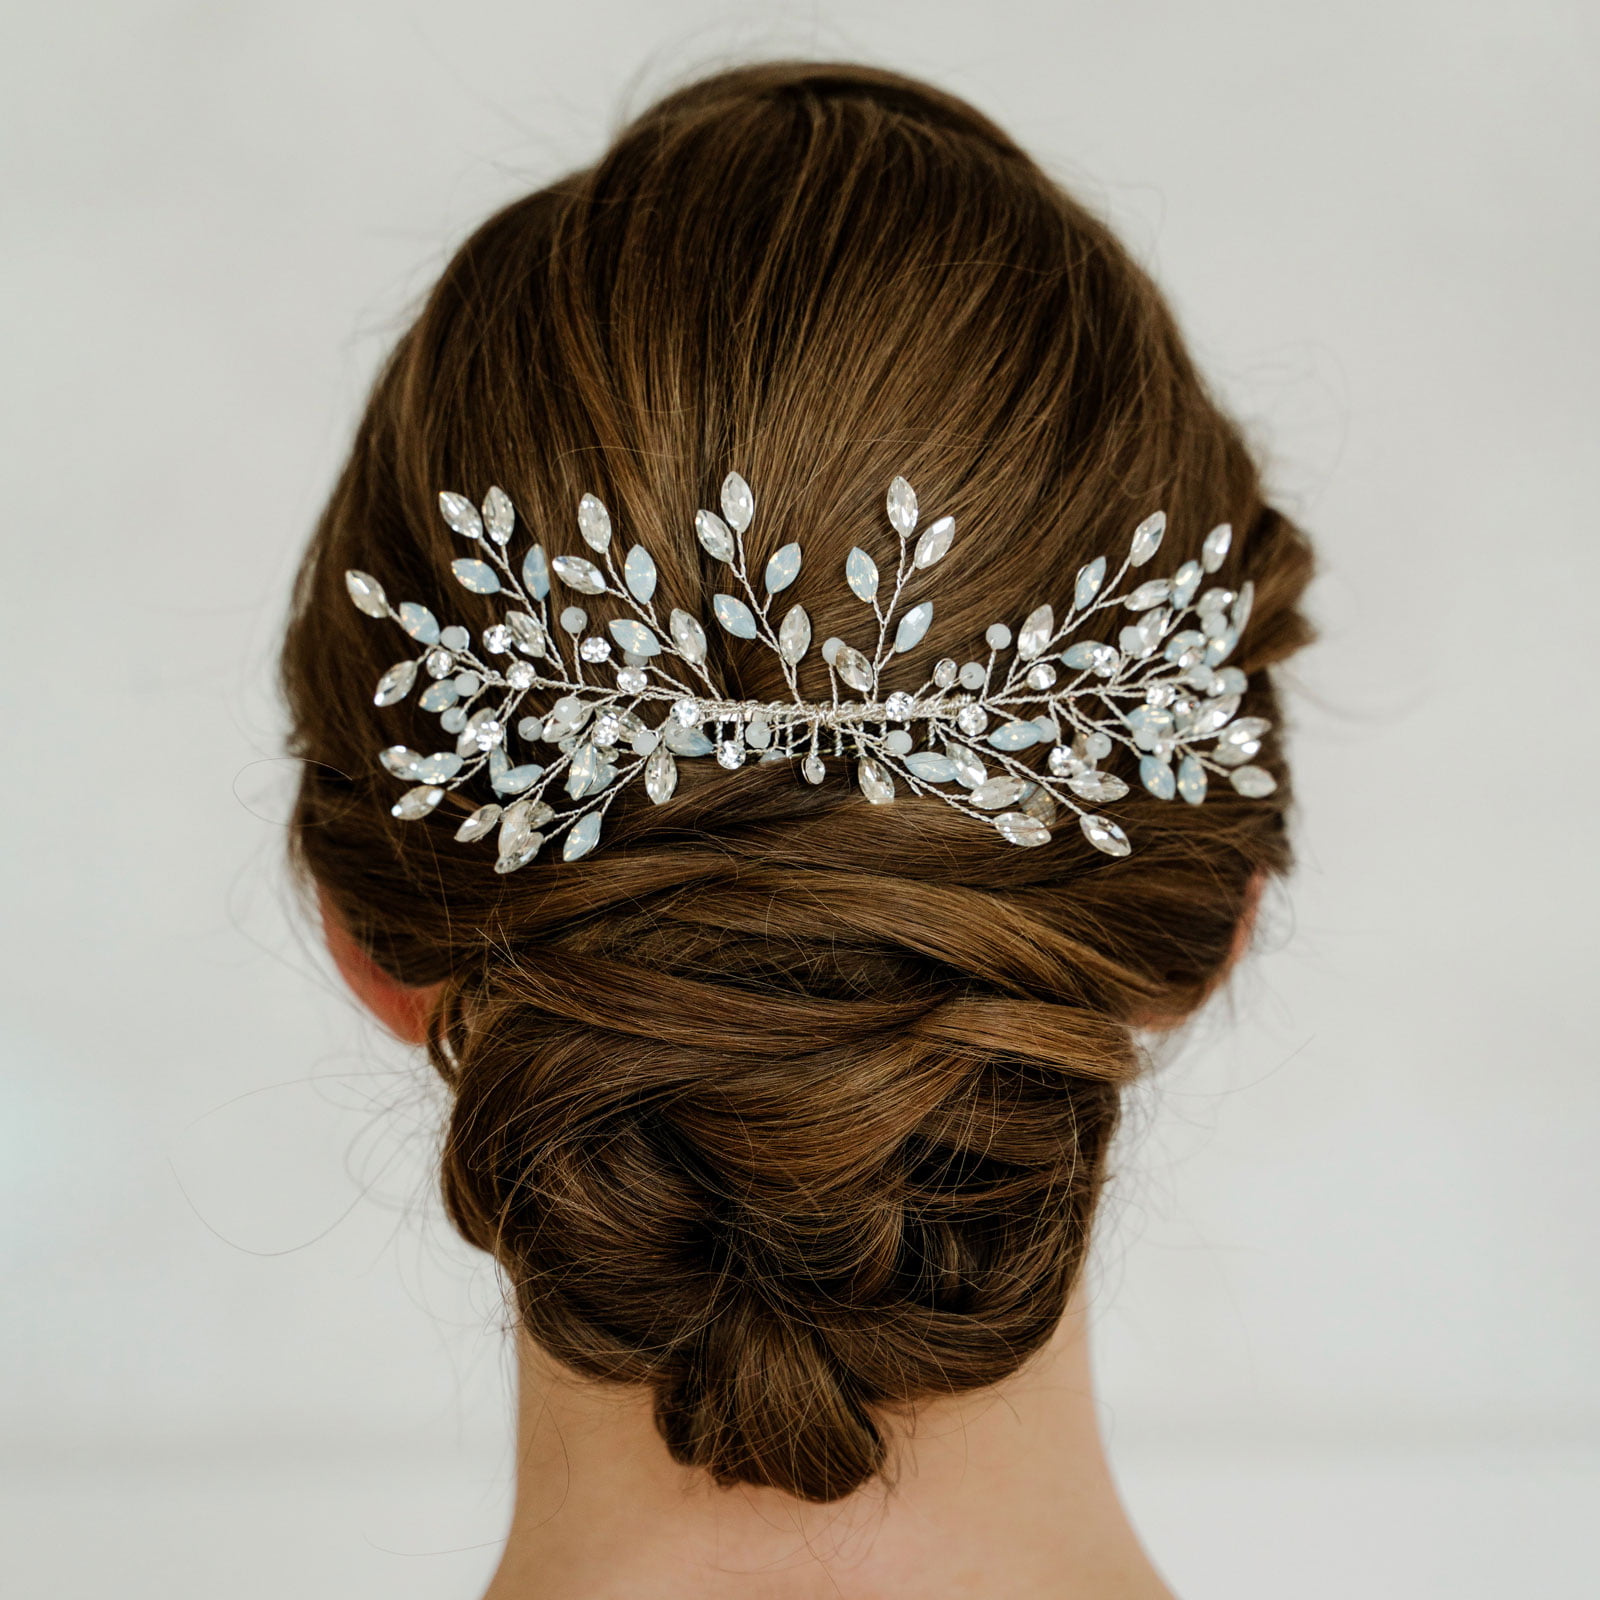 Festive hair clip with pearls and rhinestones white bronze bridal hair accessories updo gift idea woman